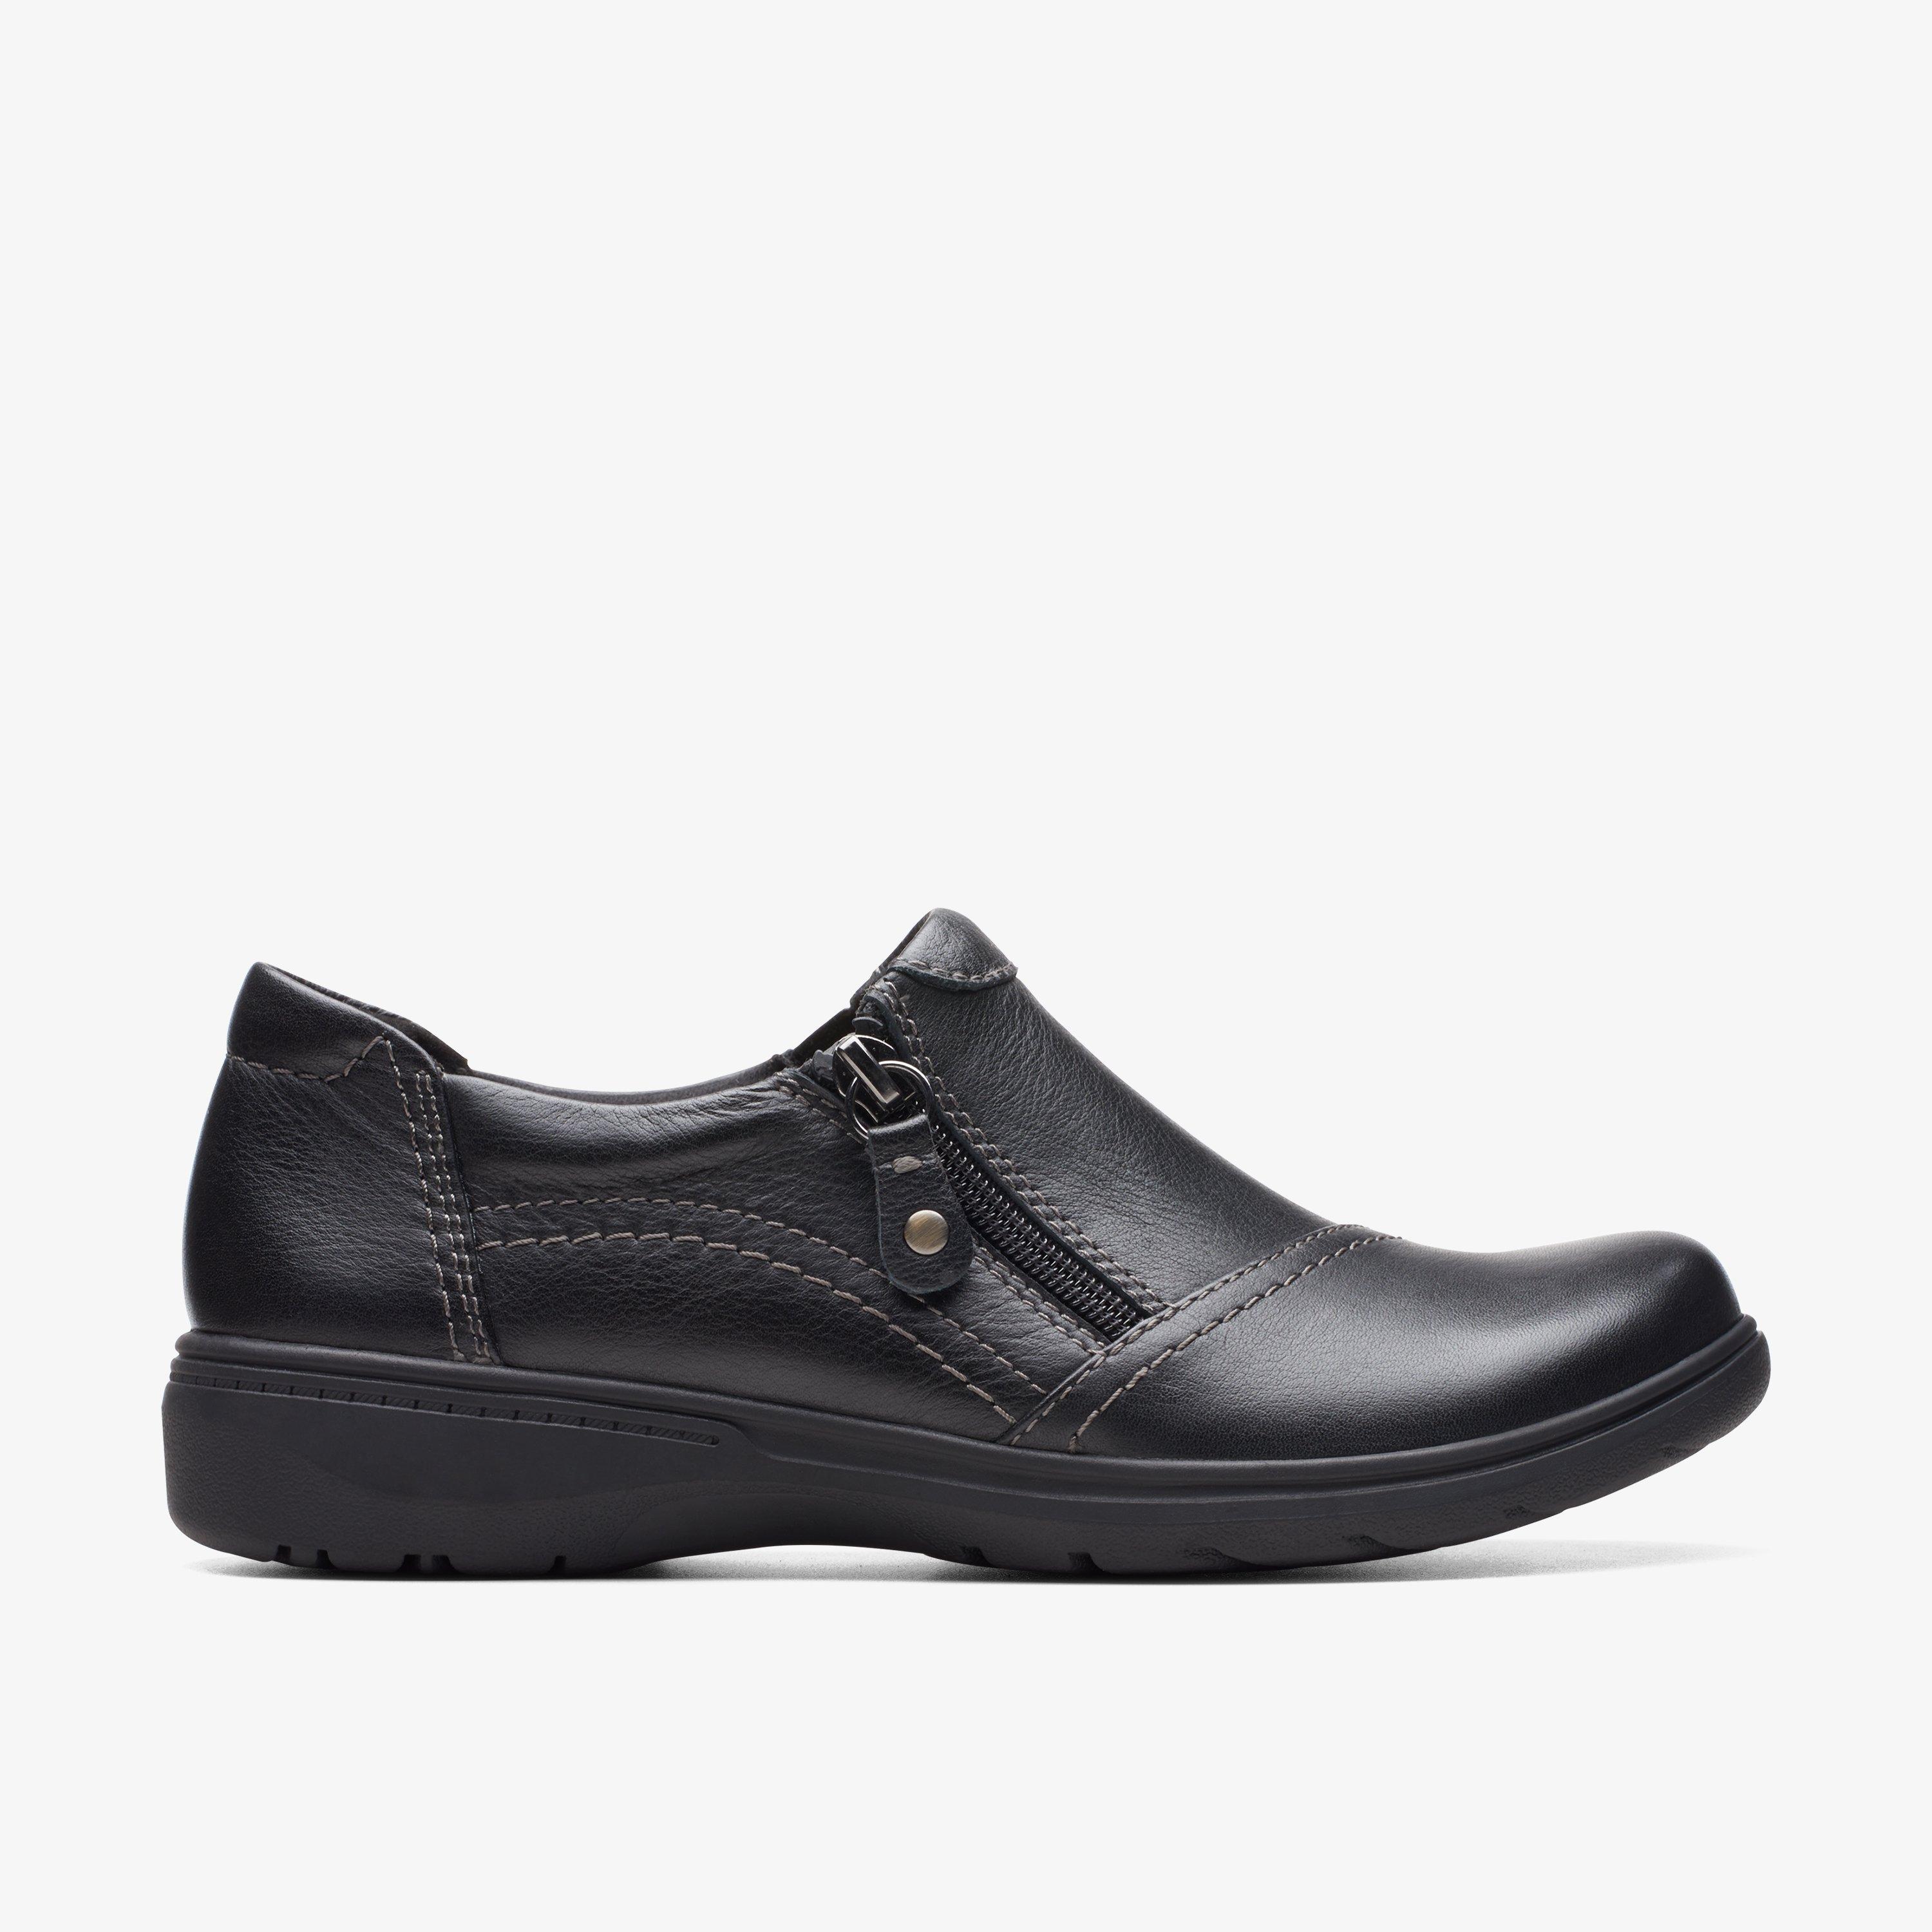 WOMENS Carleigh Ray Black Leather Slip Ons | Clarks US